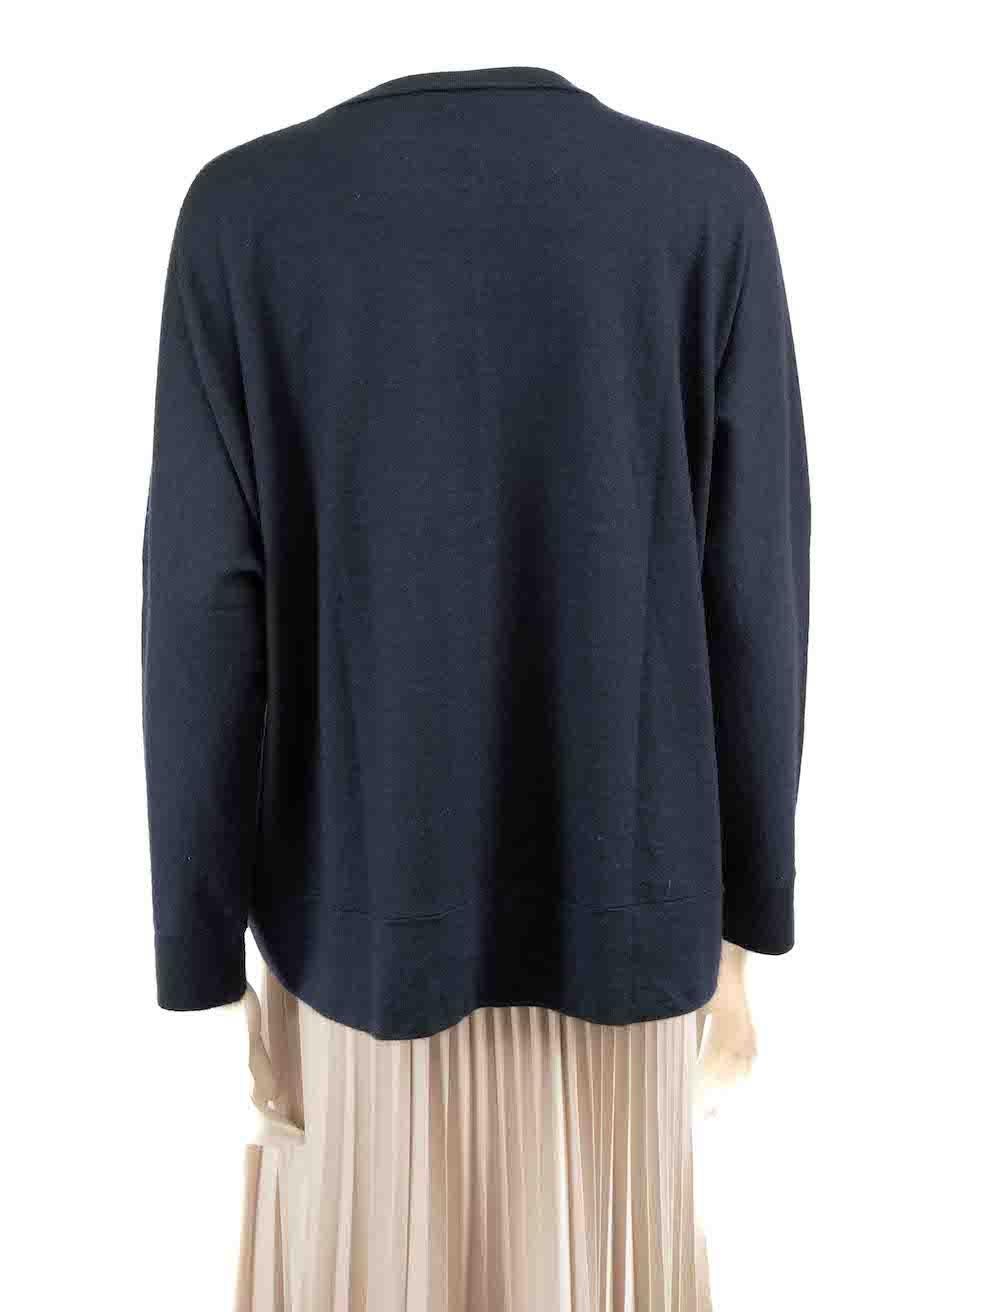 Brunello Cucinelli Navy Cashmere Long Sleeve Top Size M In New Condition For Sale In London, GB